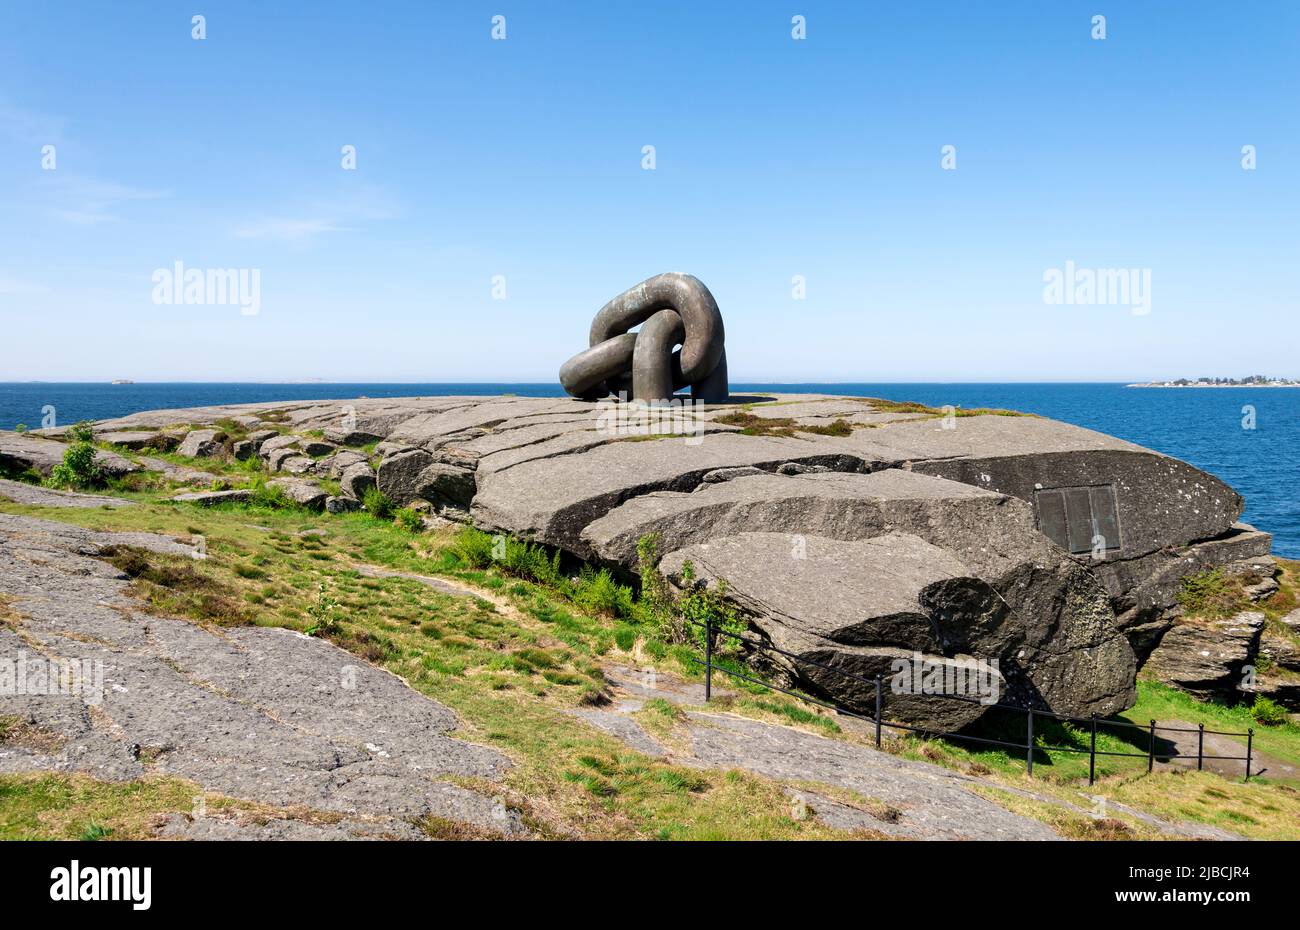 Brutt Lenke or Broken Chain monument on top of a large rock on North Sea coast in Kvernevik suburb, Stavanger, Norway, May 2018 Stock Photo